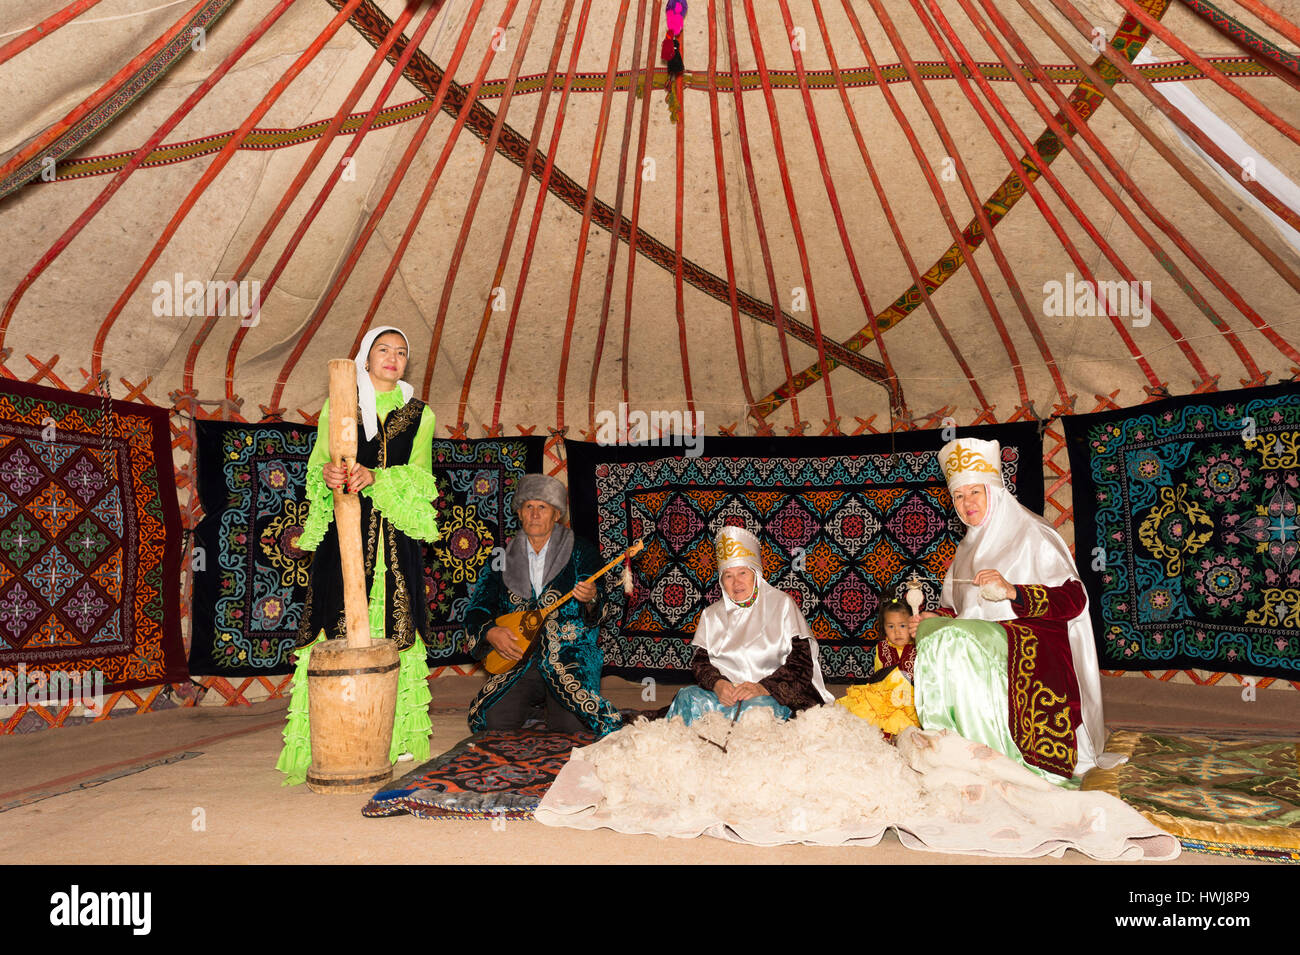 Kazakh women beating and spinning the wool, Kazakh ethnographical village Aul Gunny, Talgar city, Almaty, Kazakhstan, Central Asia, Asia, For editorial Use only Stock Photo